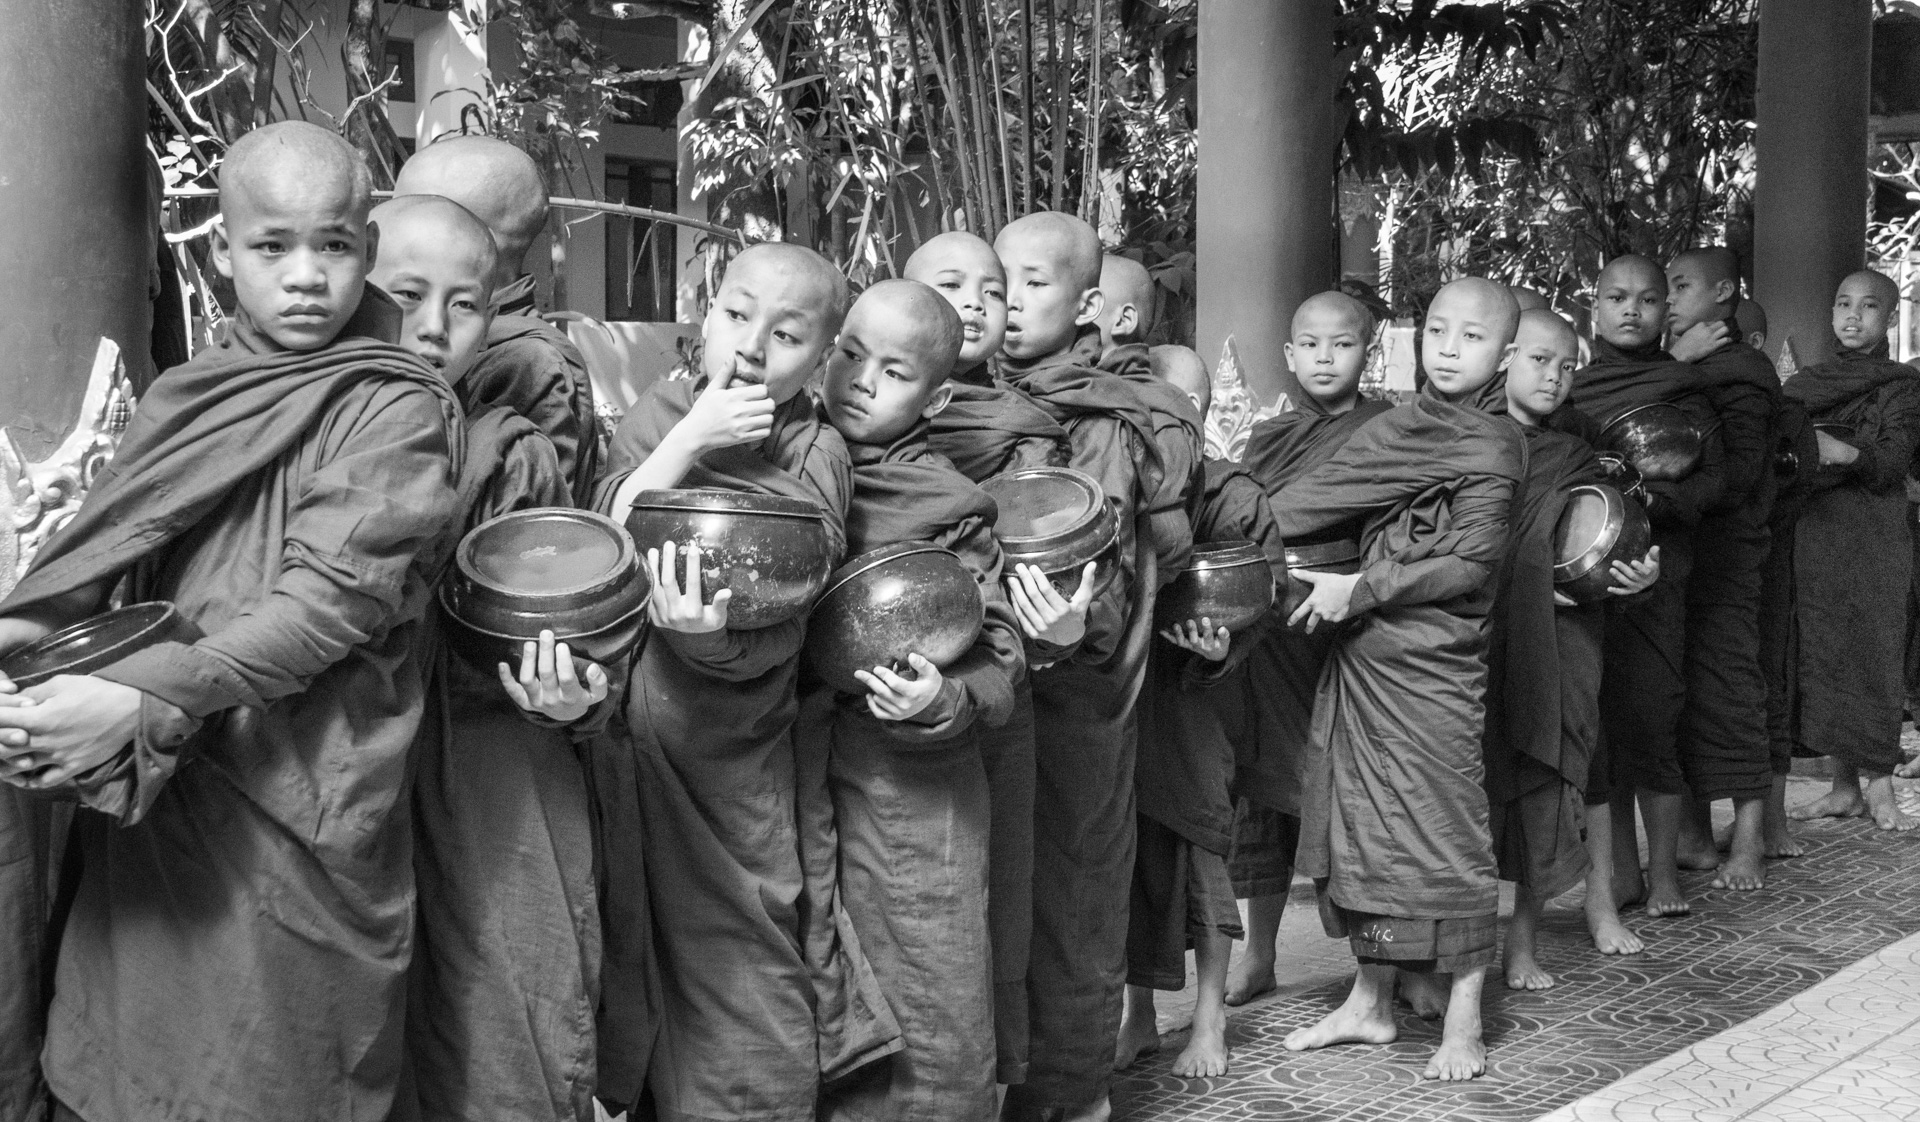 Young-monks-eagerly-await-a-helping-of-a-special-meal.-It-was-prepared-in-honor-of-their-daughters-birthday.-Myanmar-MB-1-Place-by-Suzanne-Brown-MR